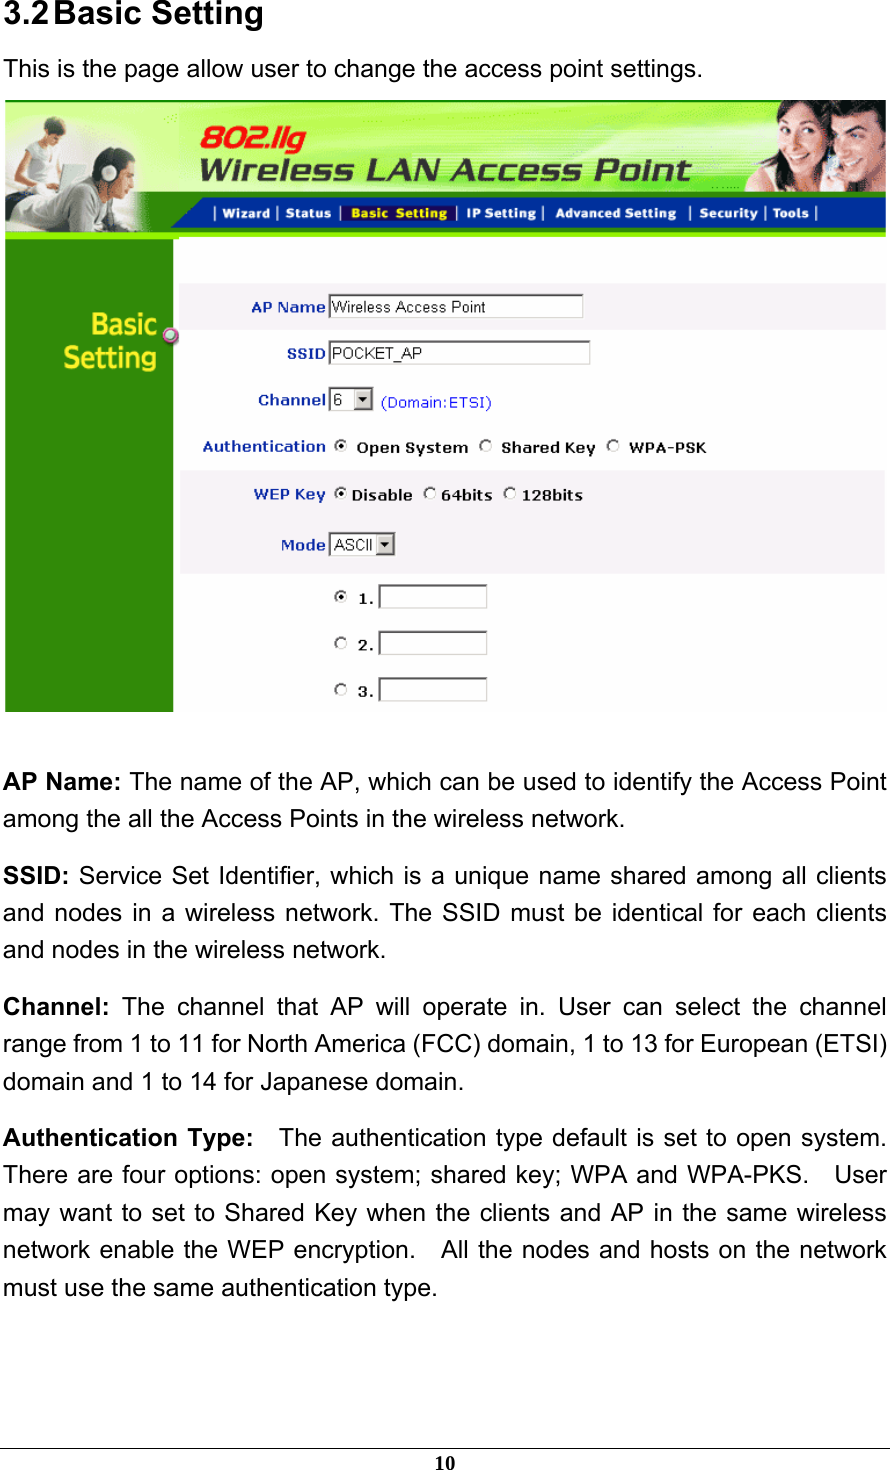 3.2 Basic  Setting This is the page allow user to change the access point settings.   AP Name: The name of the AP, which can be used to identify the Access Point among the all the Access Points in the wireless network. SSID: Service Set Identifier, which is a unique name shared among all clients and nodes in a wireless network. The SSID must be identical for each clients and nodes in the wireless network. Channel:  The channel that AP will operate in. User can select the channel range from 1 to 11 for North America (FCC) domain, 1 to 13 for European (ETSI) domain and 1 to 14 for Japanese domain. Authentication Type:    The authentication type default is set to open system.   There are four options: open system; shared key; WPA and WPA-PKS.    User may want to set to Shared Key when the clients and AP in the same wireless network enable the WEP encryption.    All the nodes and hosts on the network must use the same authentication type.       10 